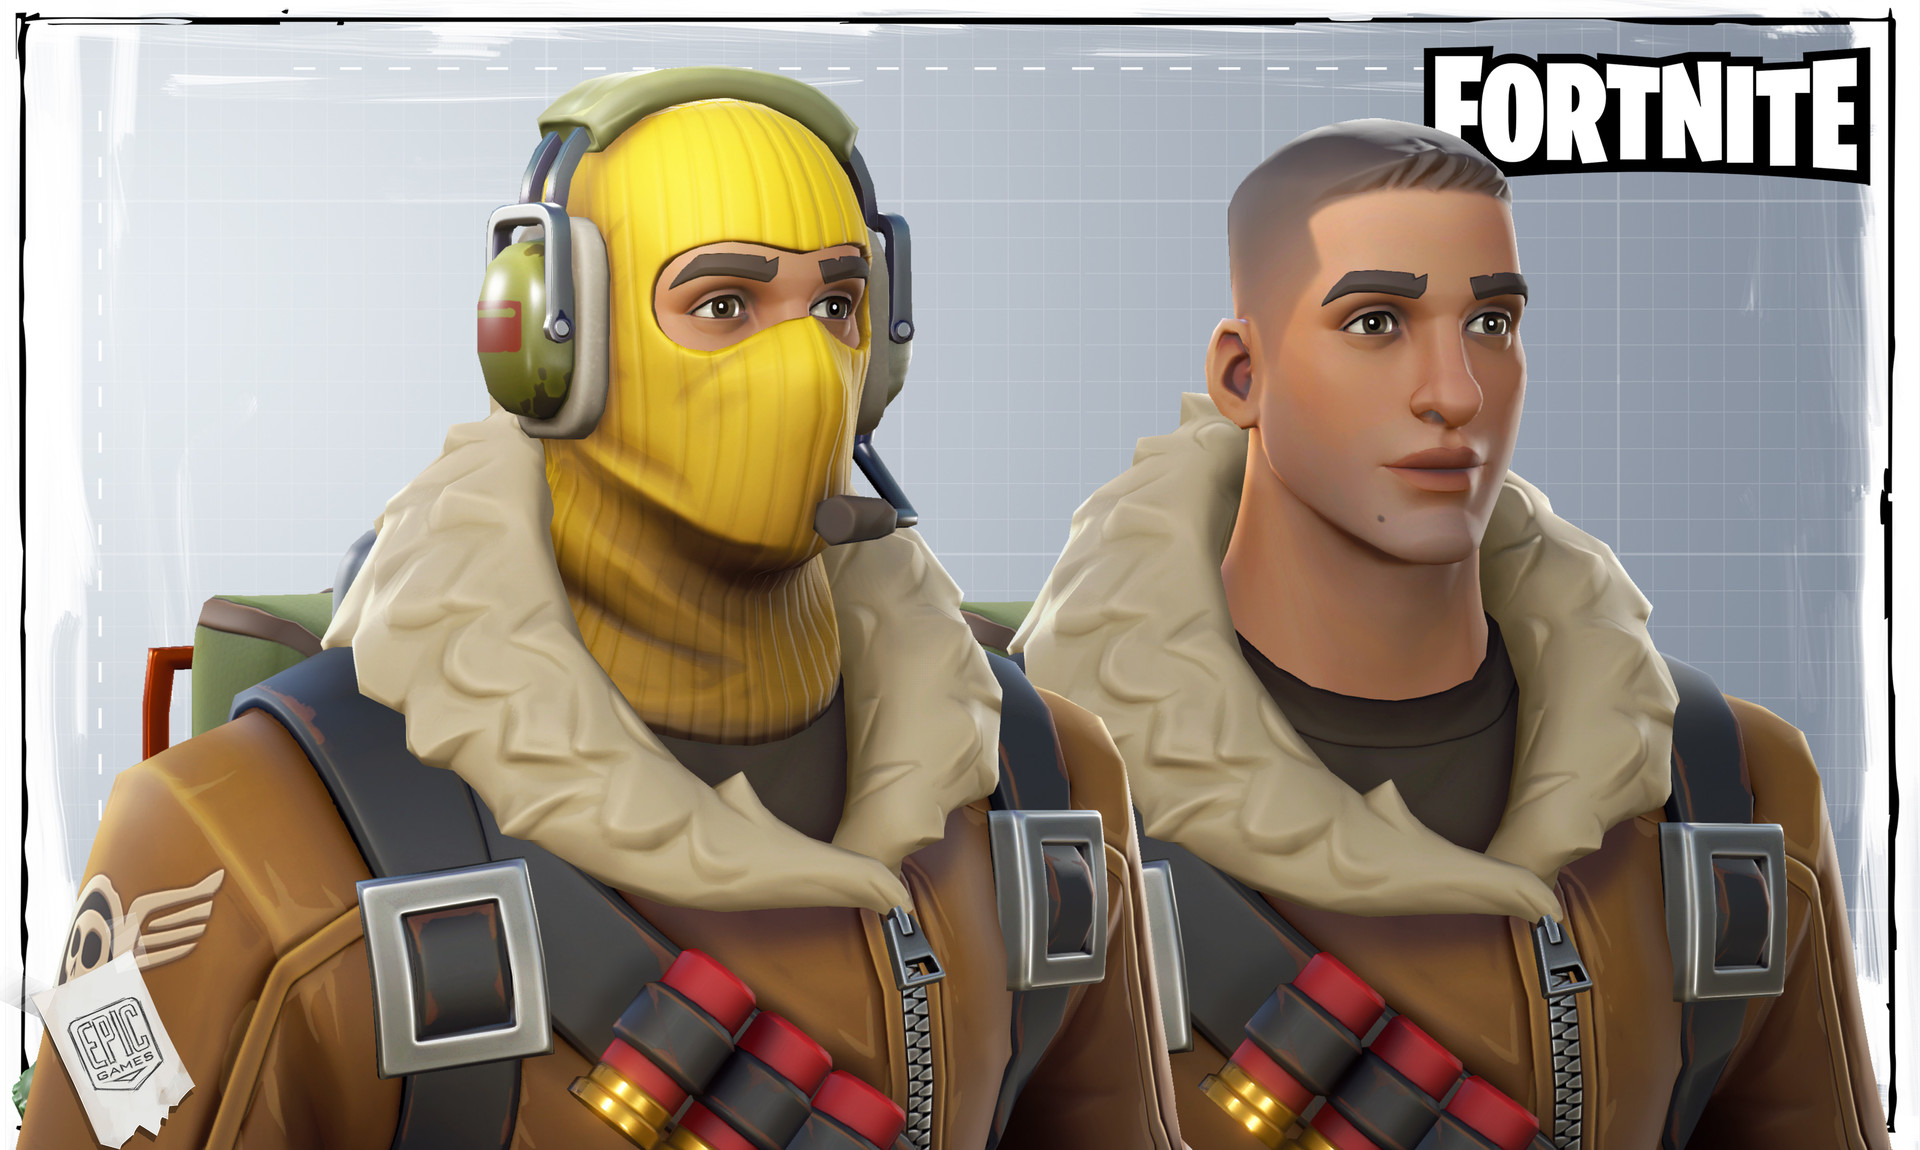 The Raptor Skin Guy Is Not One Of The Normal Characters In Game - 